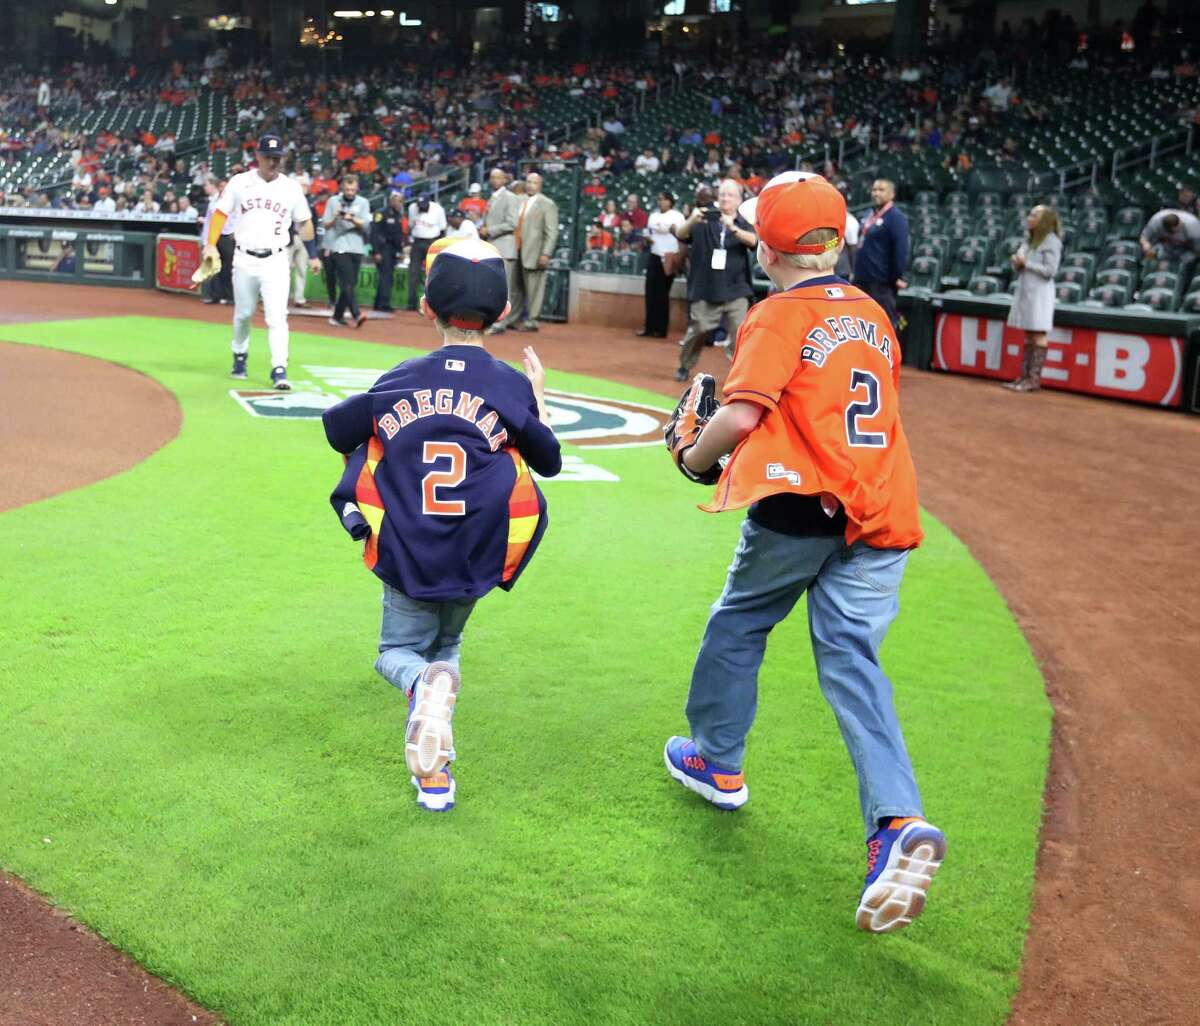 Brady Columbus, right, and his brother Bryant run to Houston Astros third baseman Alex Bregman before Brady threw out the first pitch before the start of an MLB baseball game at Minute Maid Park on Tuesday, April 19, 2022 in Houston.